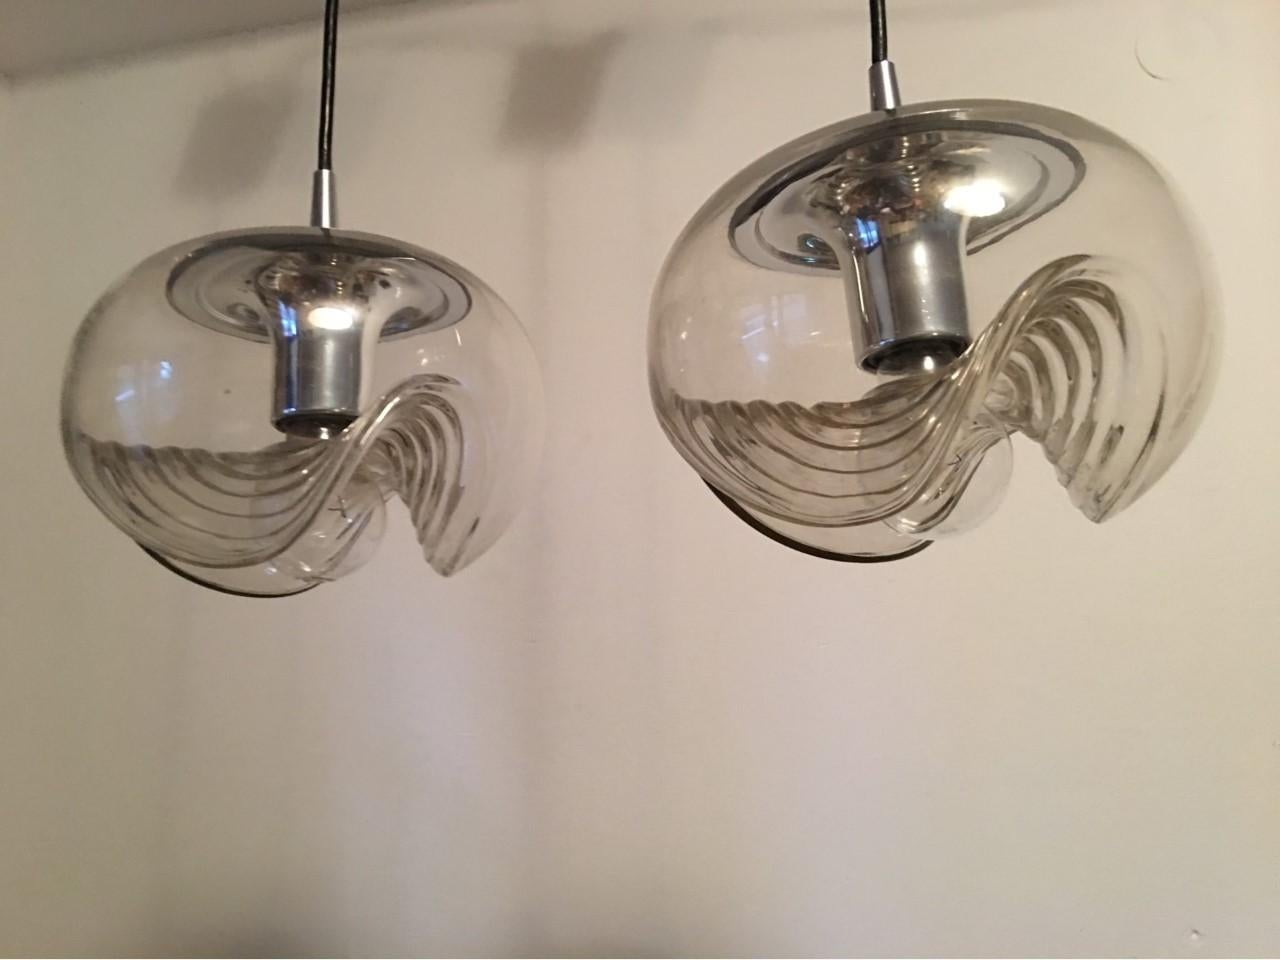 A beautiful pair of clear glass and chrome pendants from Germany. 1970s. In the USA they were also offered under the name of Koch & Lowy.
The label on these lamps shows them to be from the German manufacturer Peill & Putzler. Each requires on